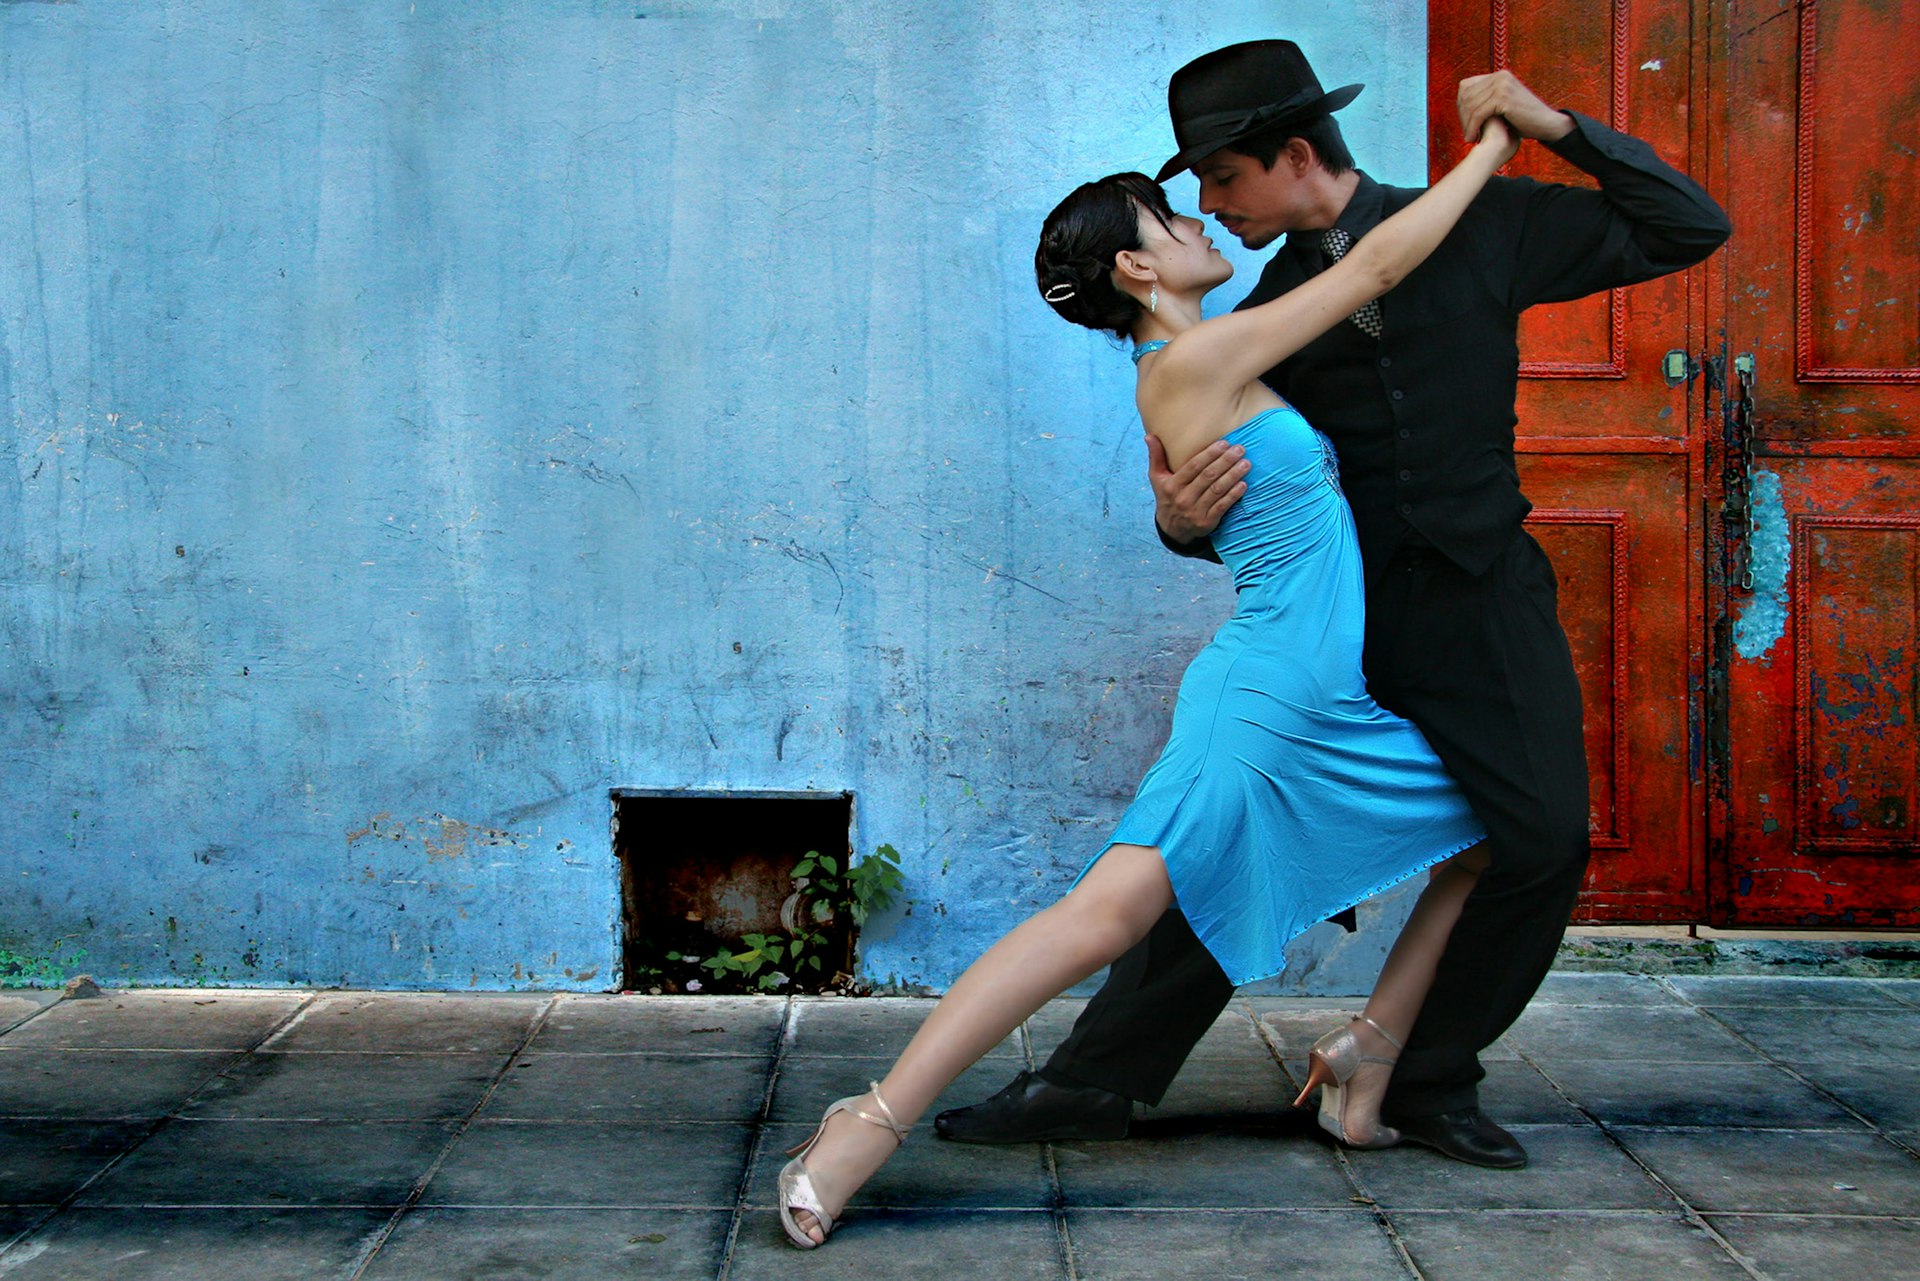 Two tango dancers against a background of a blue wall